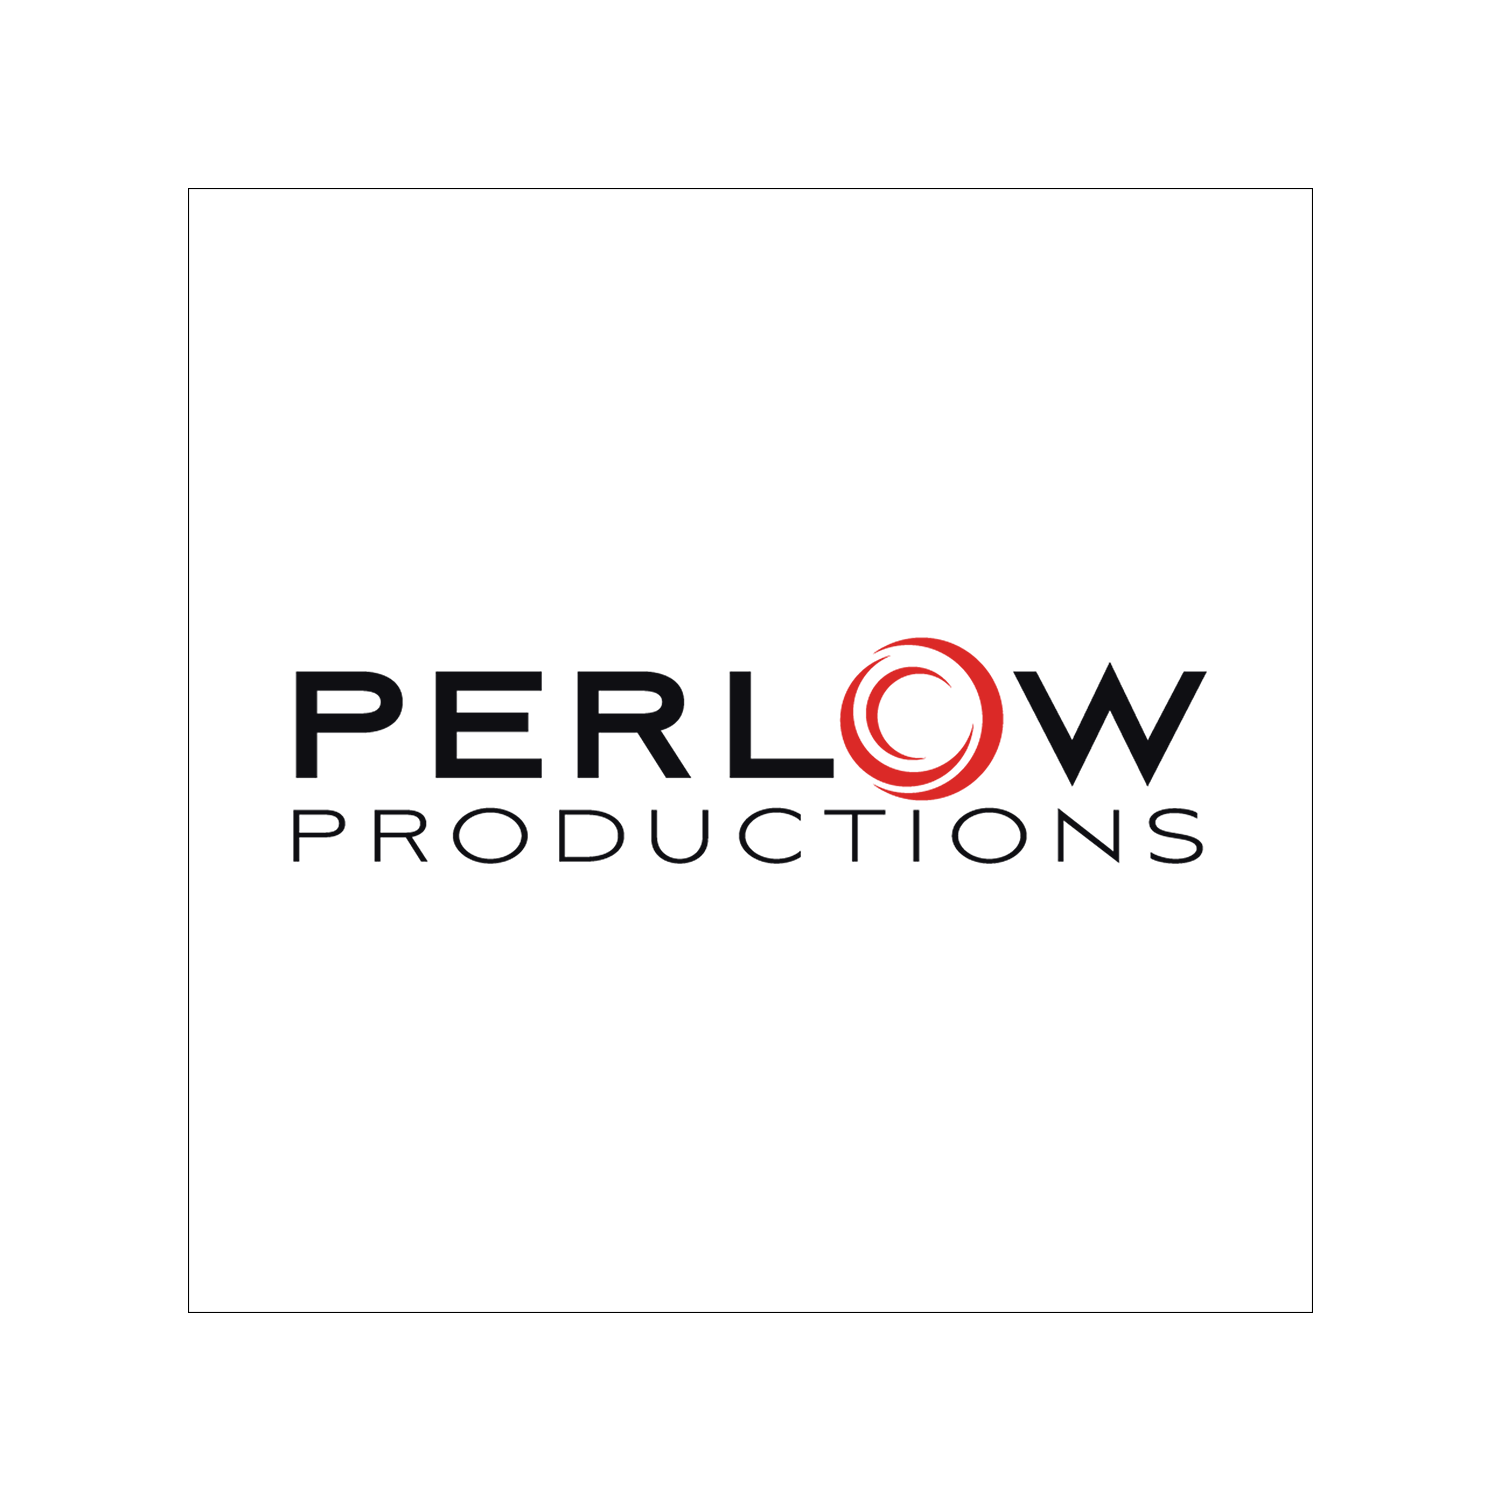 Perlow Productions